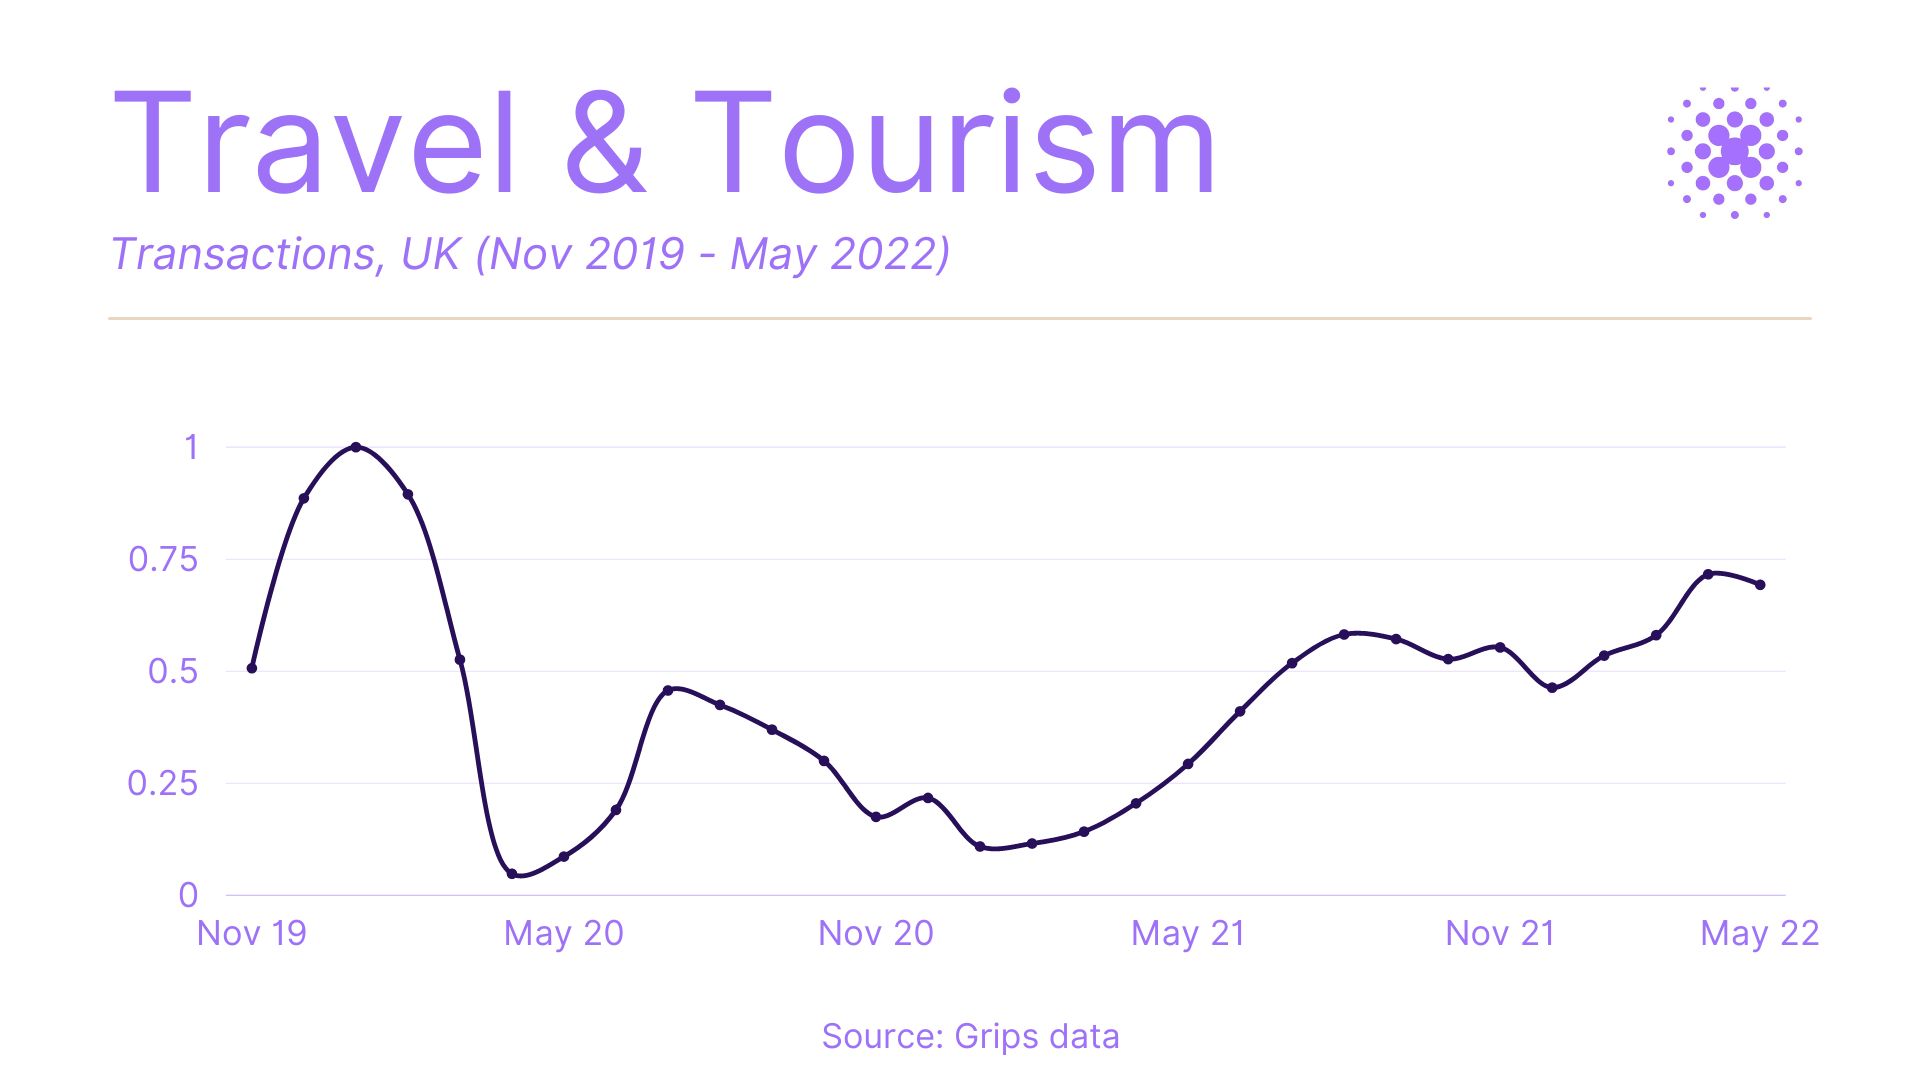 transactions in travel and tourism industry in the uk